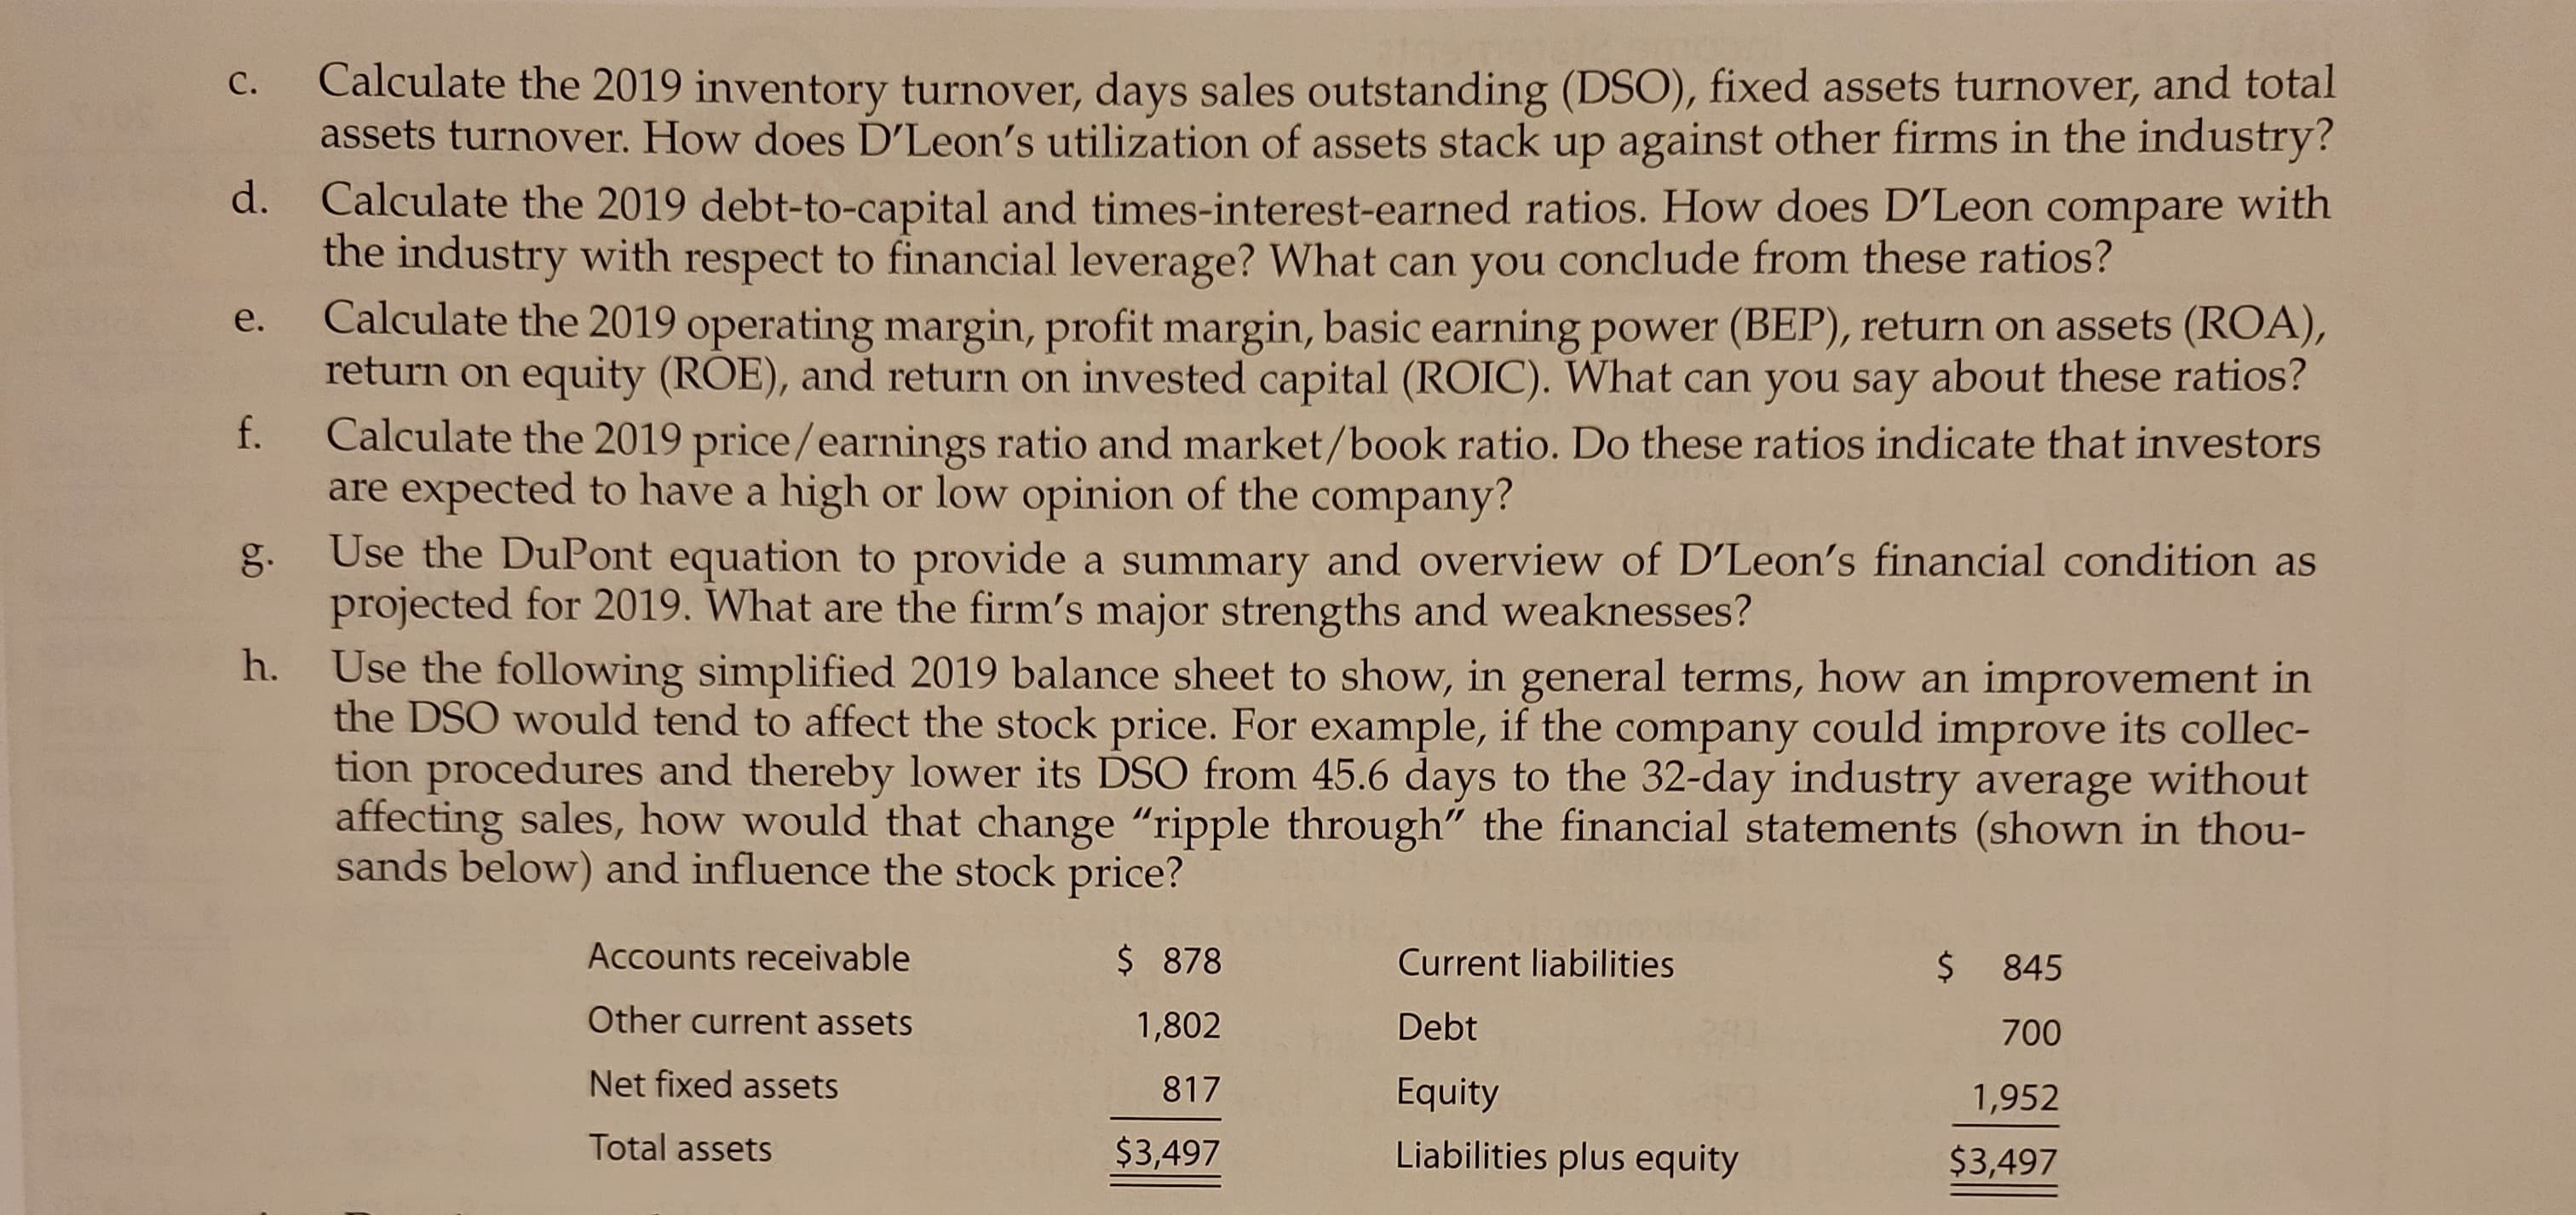 C.
d.
e.
f.
g.
h.
Calculate the 2019 inventory turnover, days sales outstanding (DSO), fixed assets turnover, and total
assets turnover. How does D'Leon's utilization of assets stack up against other firms in the industry?
Calculate the 2019 debt-to-capital and times-interest-earned ratios. How does D'Leon compare with
the industry with respect to financial leverage? What can you conclude from these ratios?
Calculate the 2019 operating margin, profit margin, basic earning power (BEP), return on assets (ROA),
return on equity (ROE), and return on invested capital (ROIC). What can you say about these ratios?
Calculate the 2019 price/earnings ratio and market/book ratio. Do these ratios indicate that investors
are expected to have a high or low opinion of the company?
Use the DuPont equation to provide a summary and overview of D'Leon's financial condition as
projected for 2019. What are the firm's major strengths and weaknesses?
Use the following simplified 2019 balance sheet to show, in general terms, how an improvement in
the DSO would tend to affect the stock price. For example, if the company could improve its collec-
tion procedures and thereby lower its DSO from 45.6 days to the 32-day industry average without
affecting sales, how would that change "ripple through" the financial statements (shown in thou-
sands below) and influence the stock price?
Accounts receivable
Other current assets
Net fixed assets
Total assets
$ 878
1,802
817
$3,497
Current liabilities
Debt
Equity
Liabilities plus equity
$ 845
700
1,952
$3,497